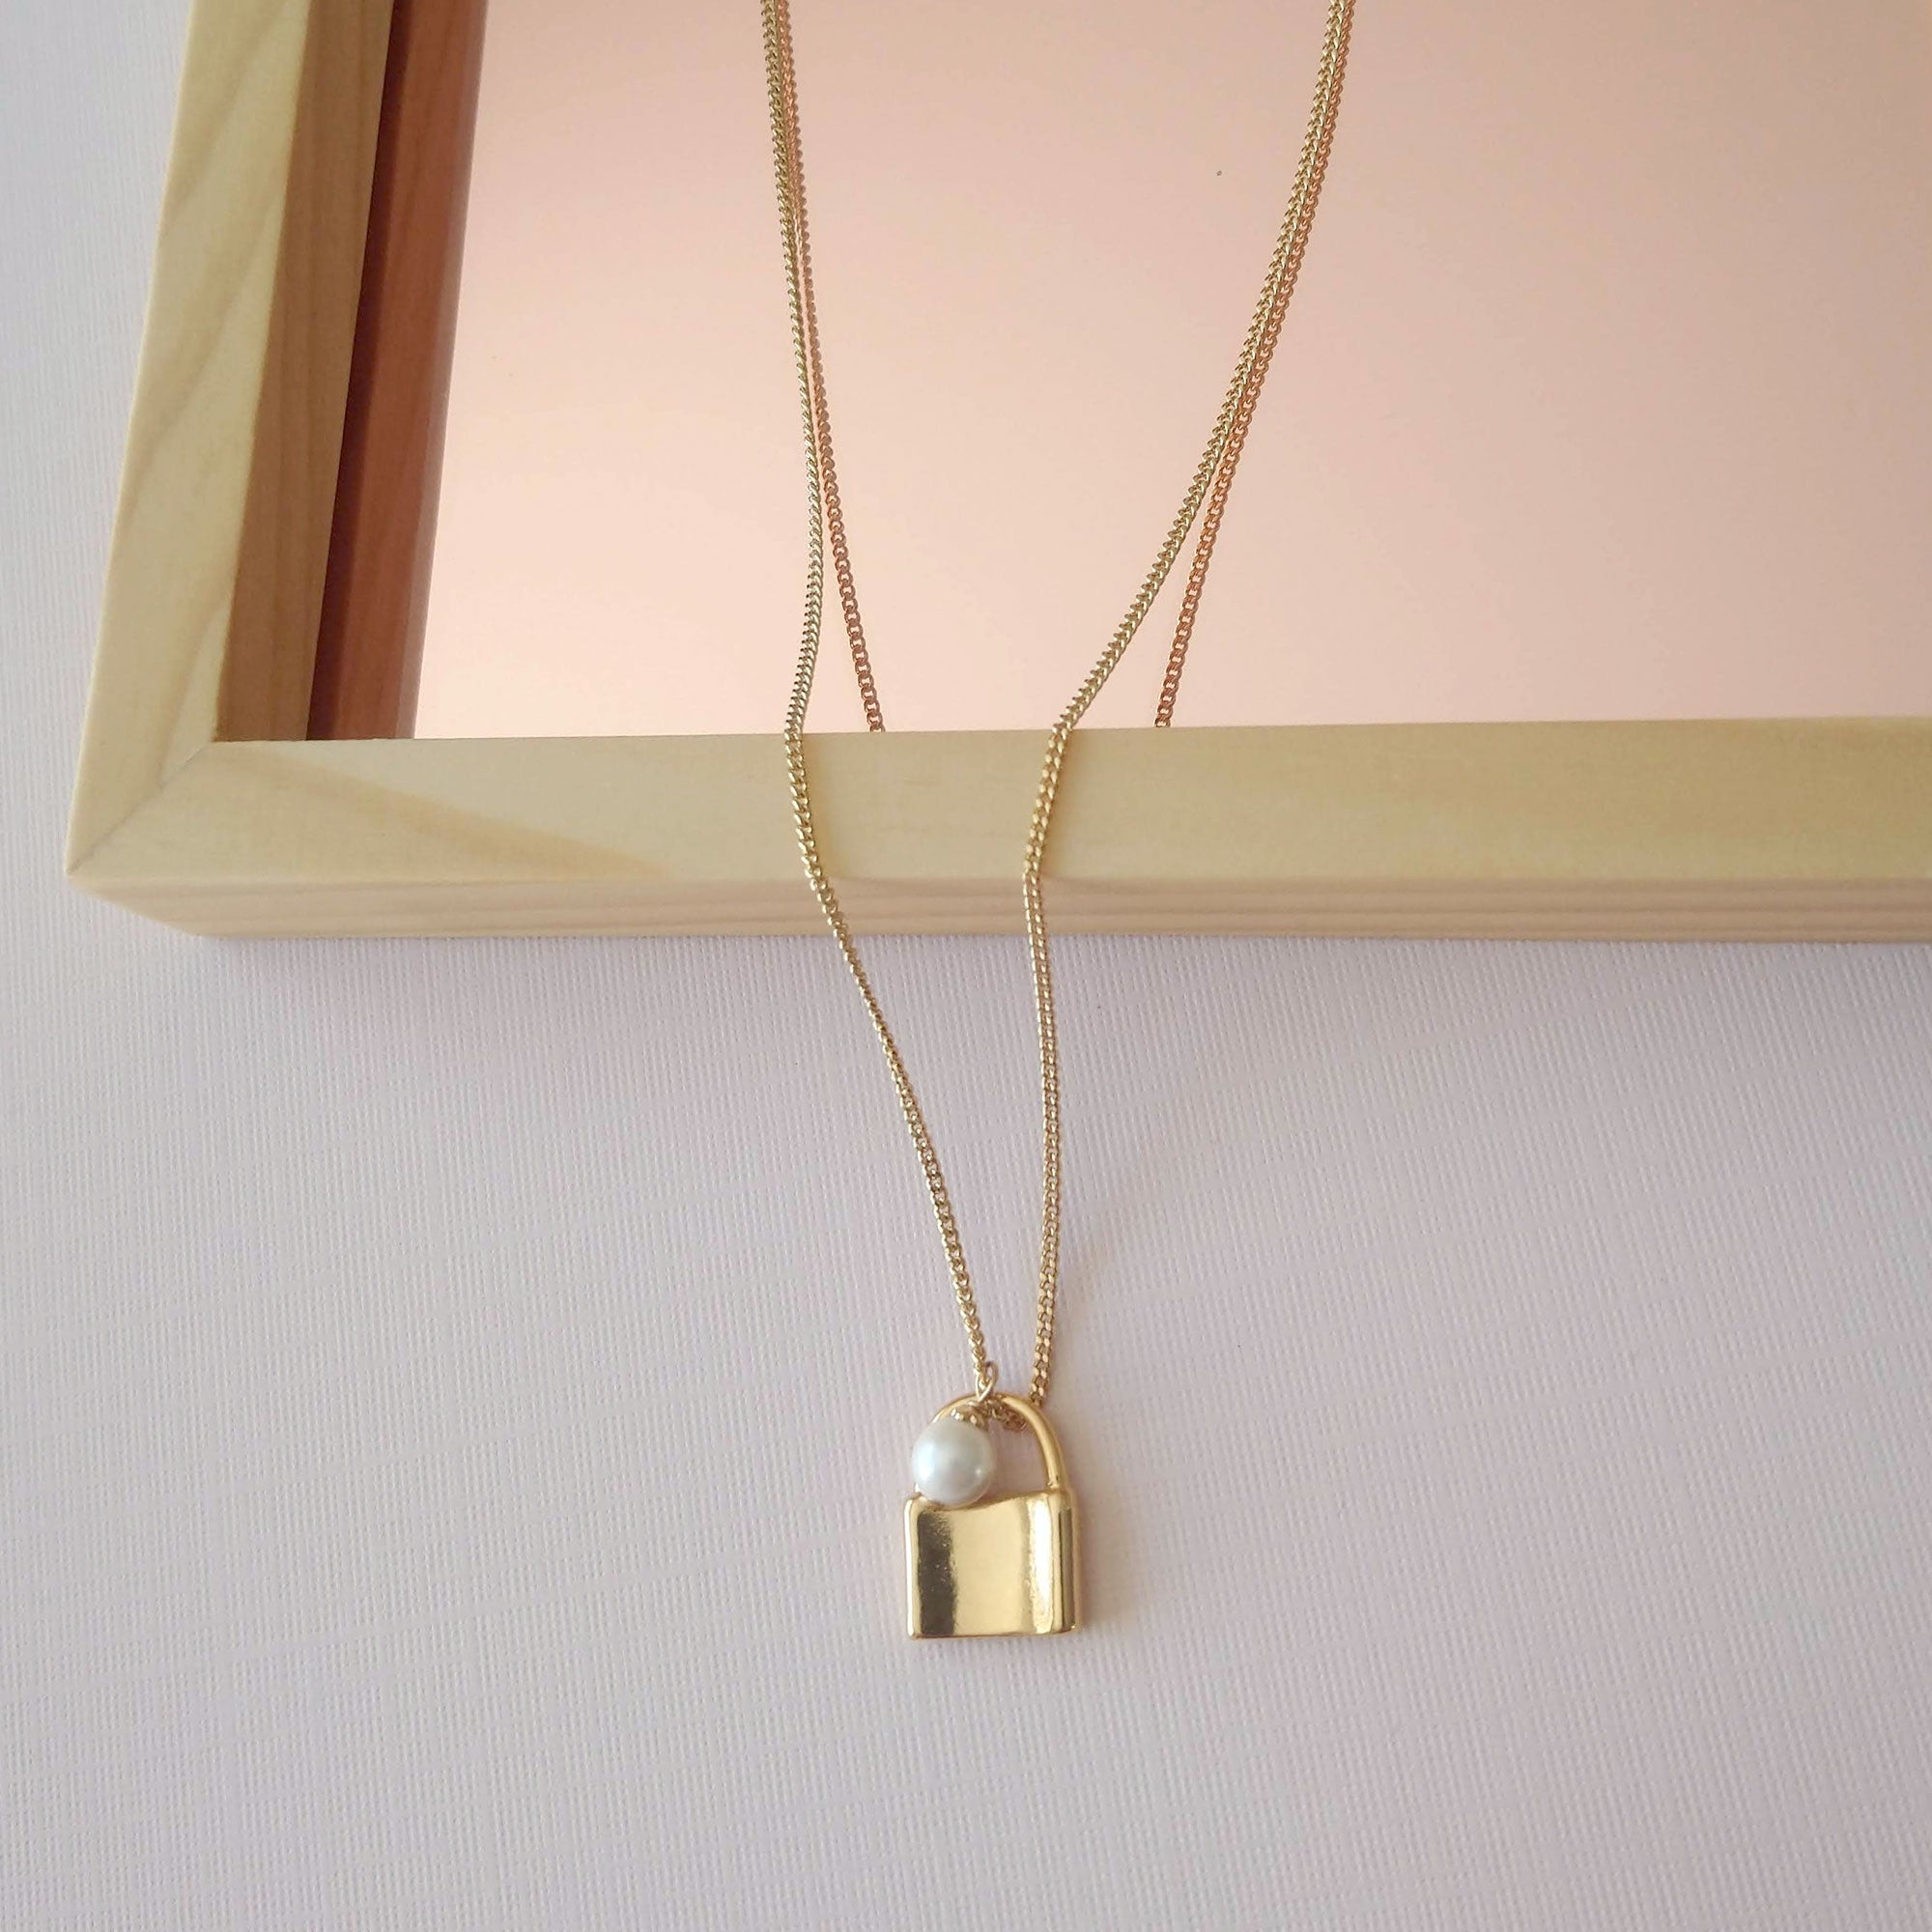 gold padlock necklace with pearl